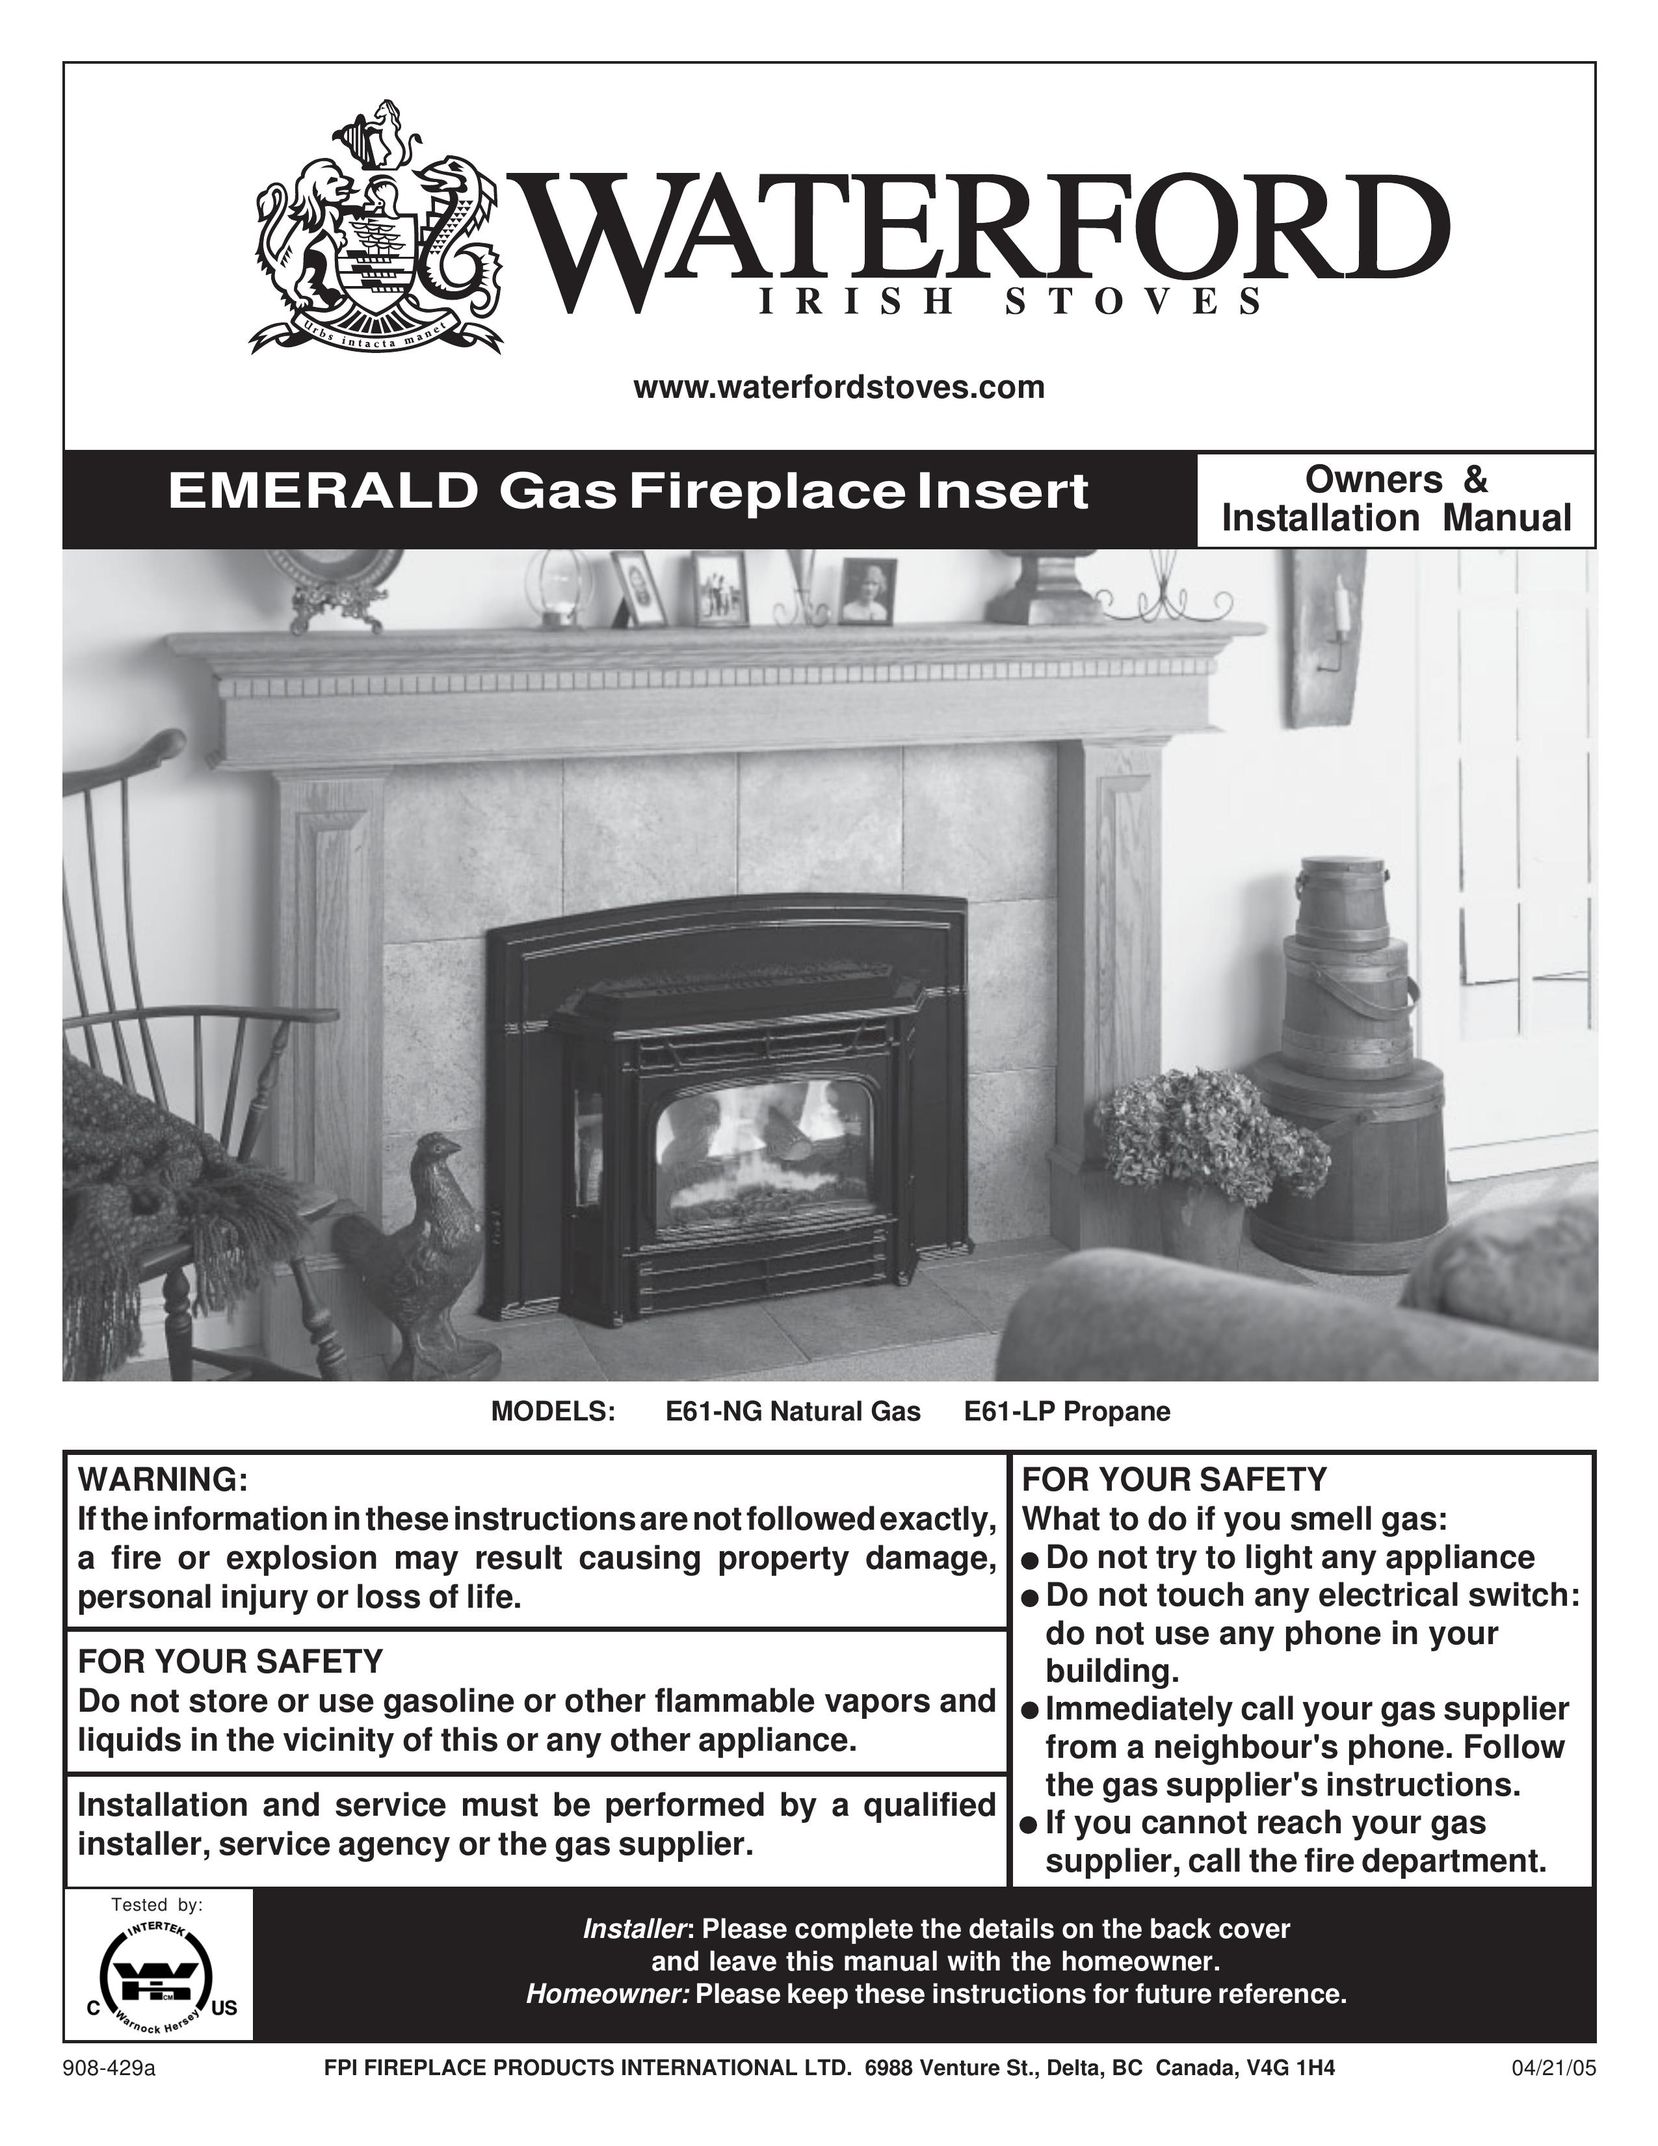 Waterford Appliances E61-LP Indoor Fireplace User Manual